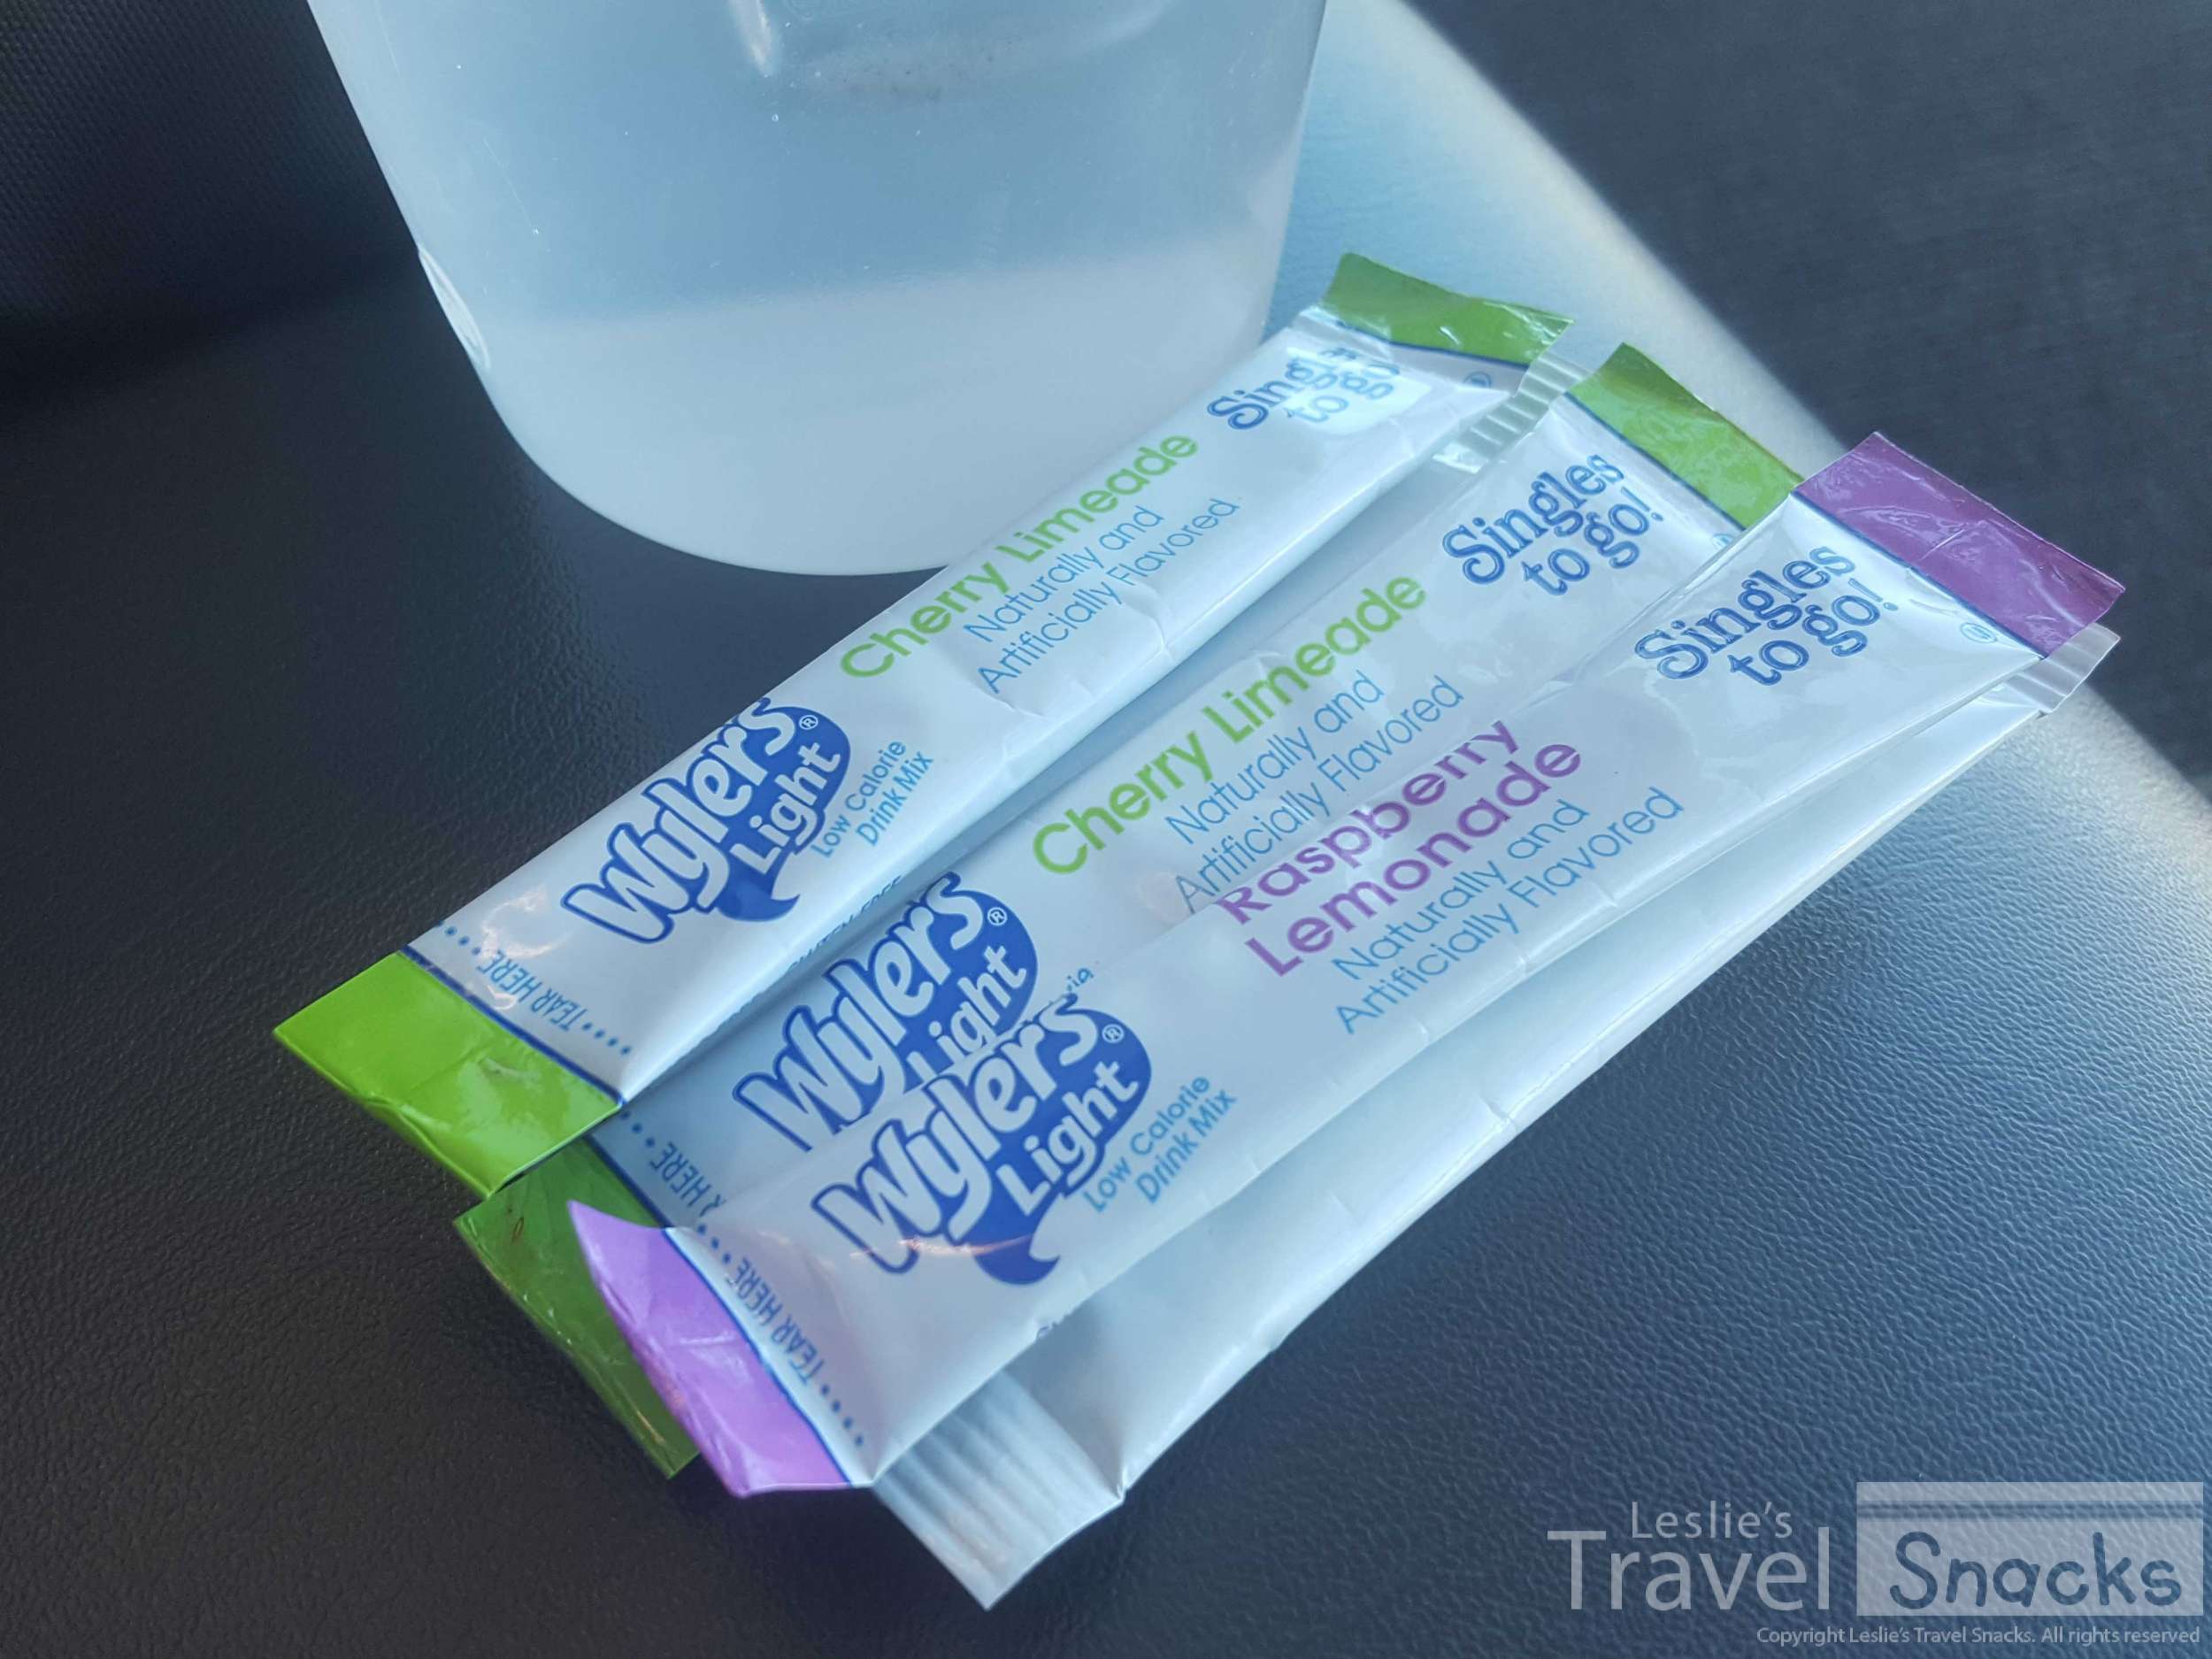 Tired of plain water? $.99 for 10 sugar-free drink packets.